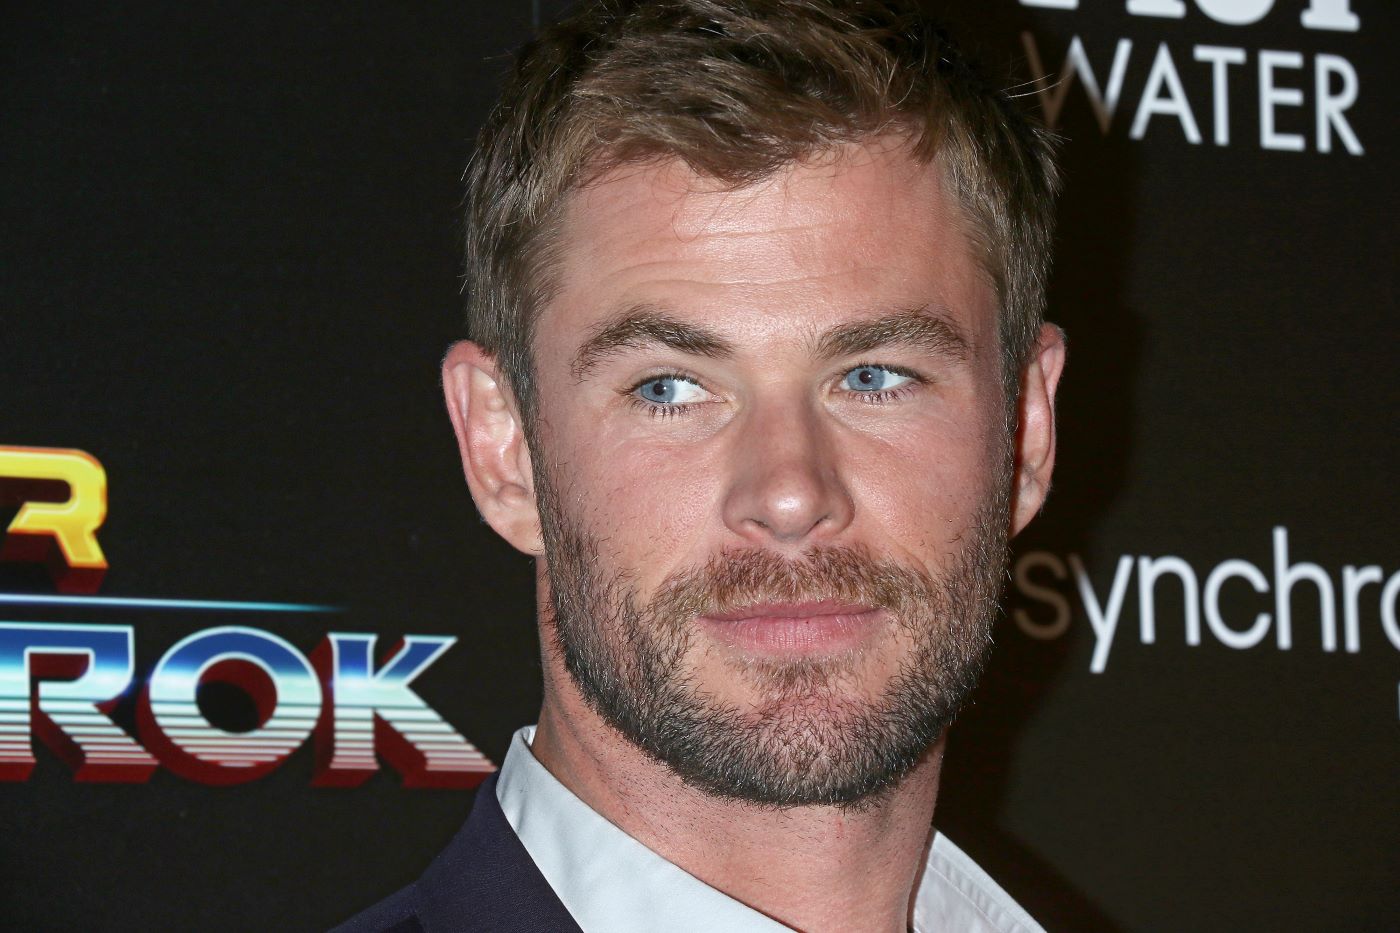 Chris Hemsworth dressed in a white collared shirt and a black background.